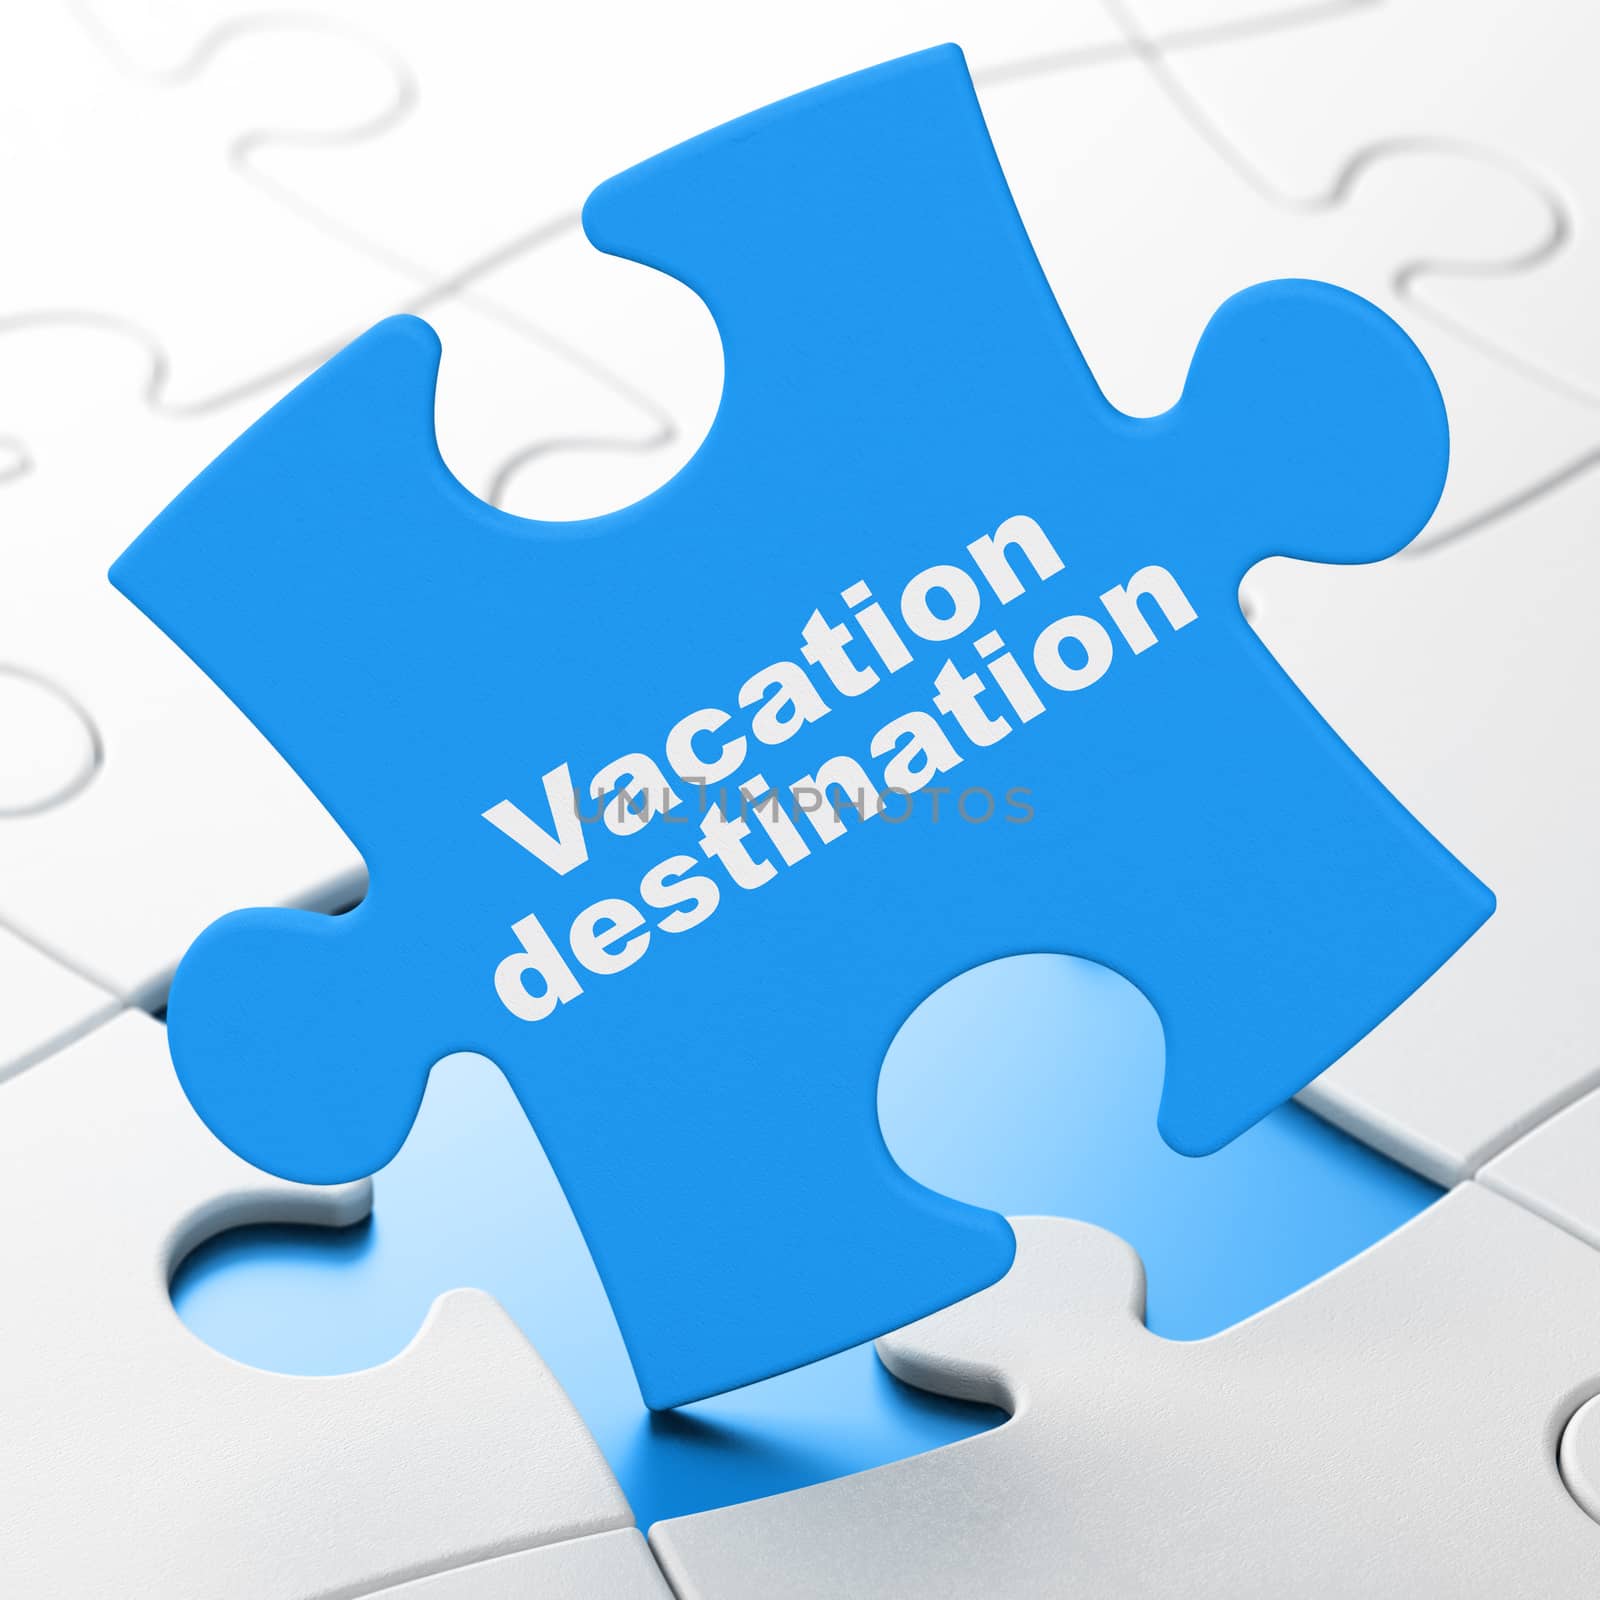 Vacation concept: Vacation Destination on Blue puzzle pieces background, 3D rendering